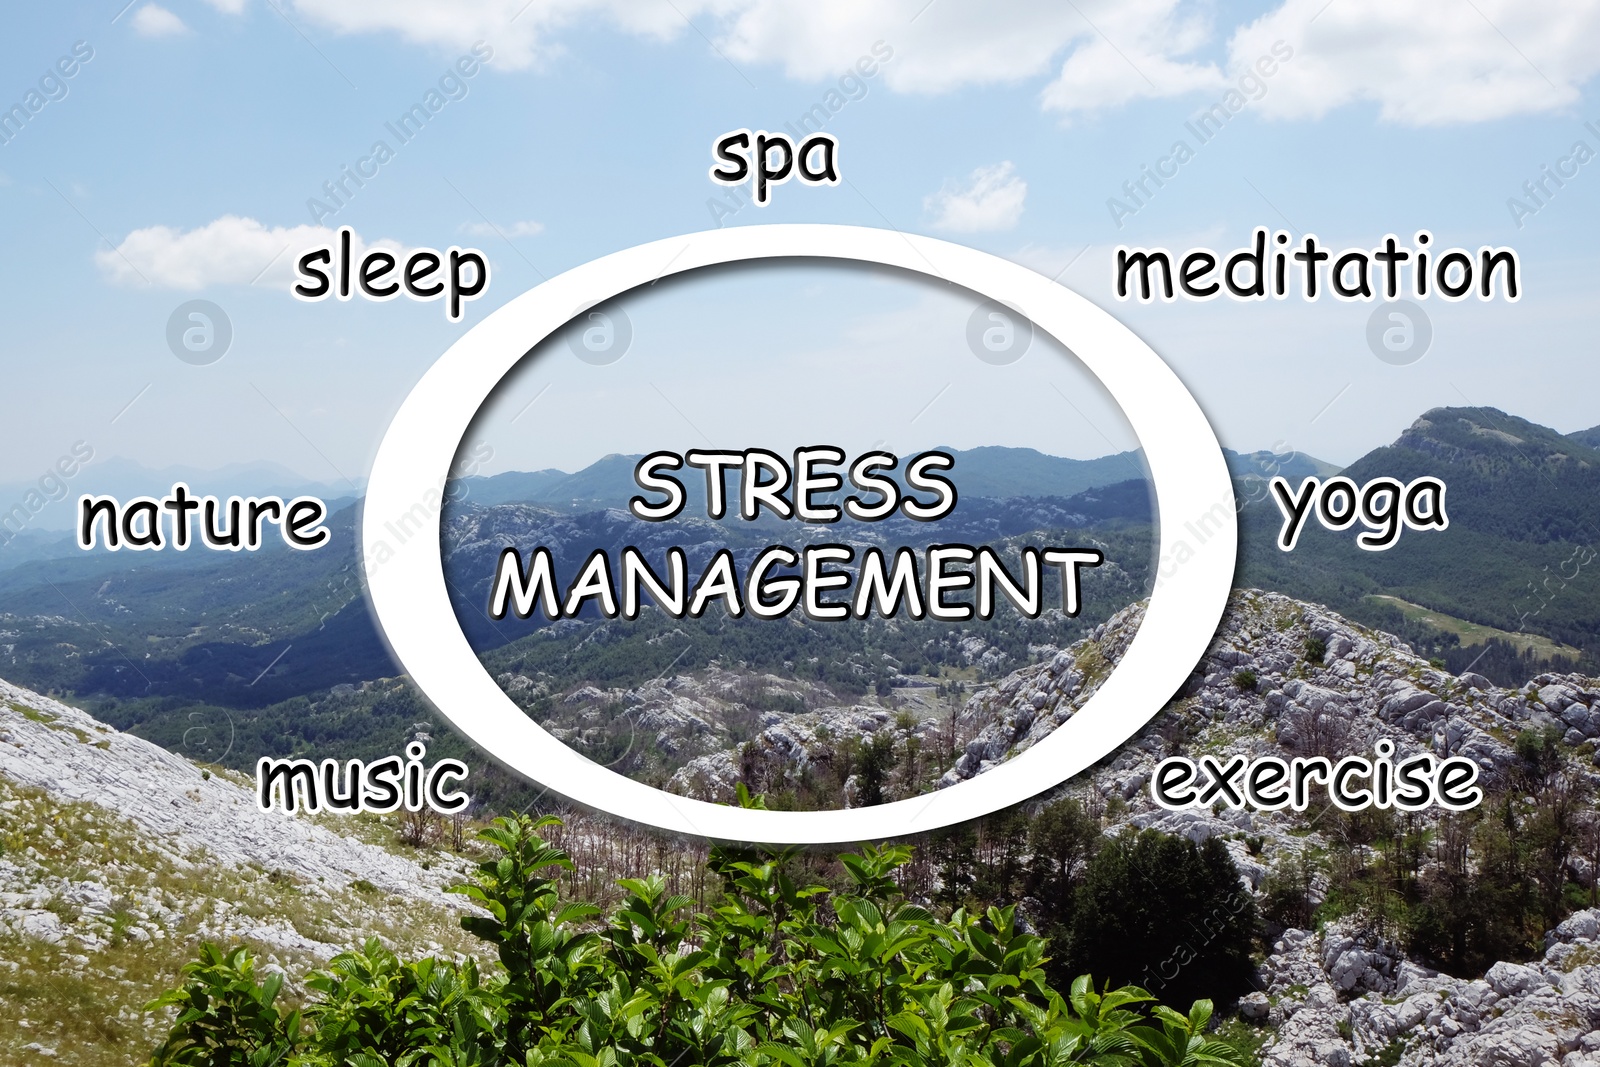 Image of Stress management techniques scheme and mountain landscape on background